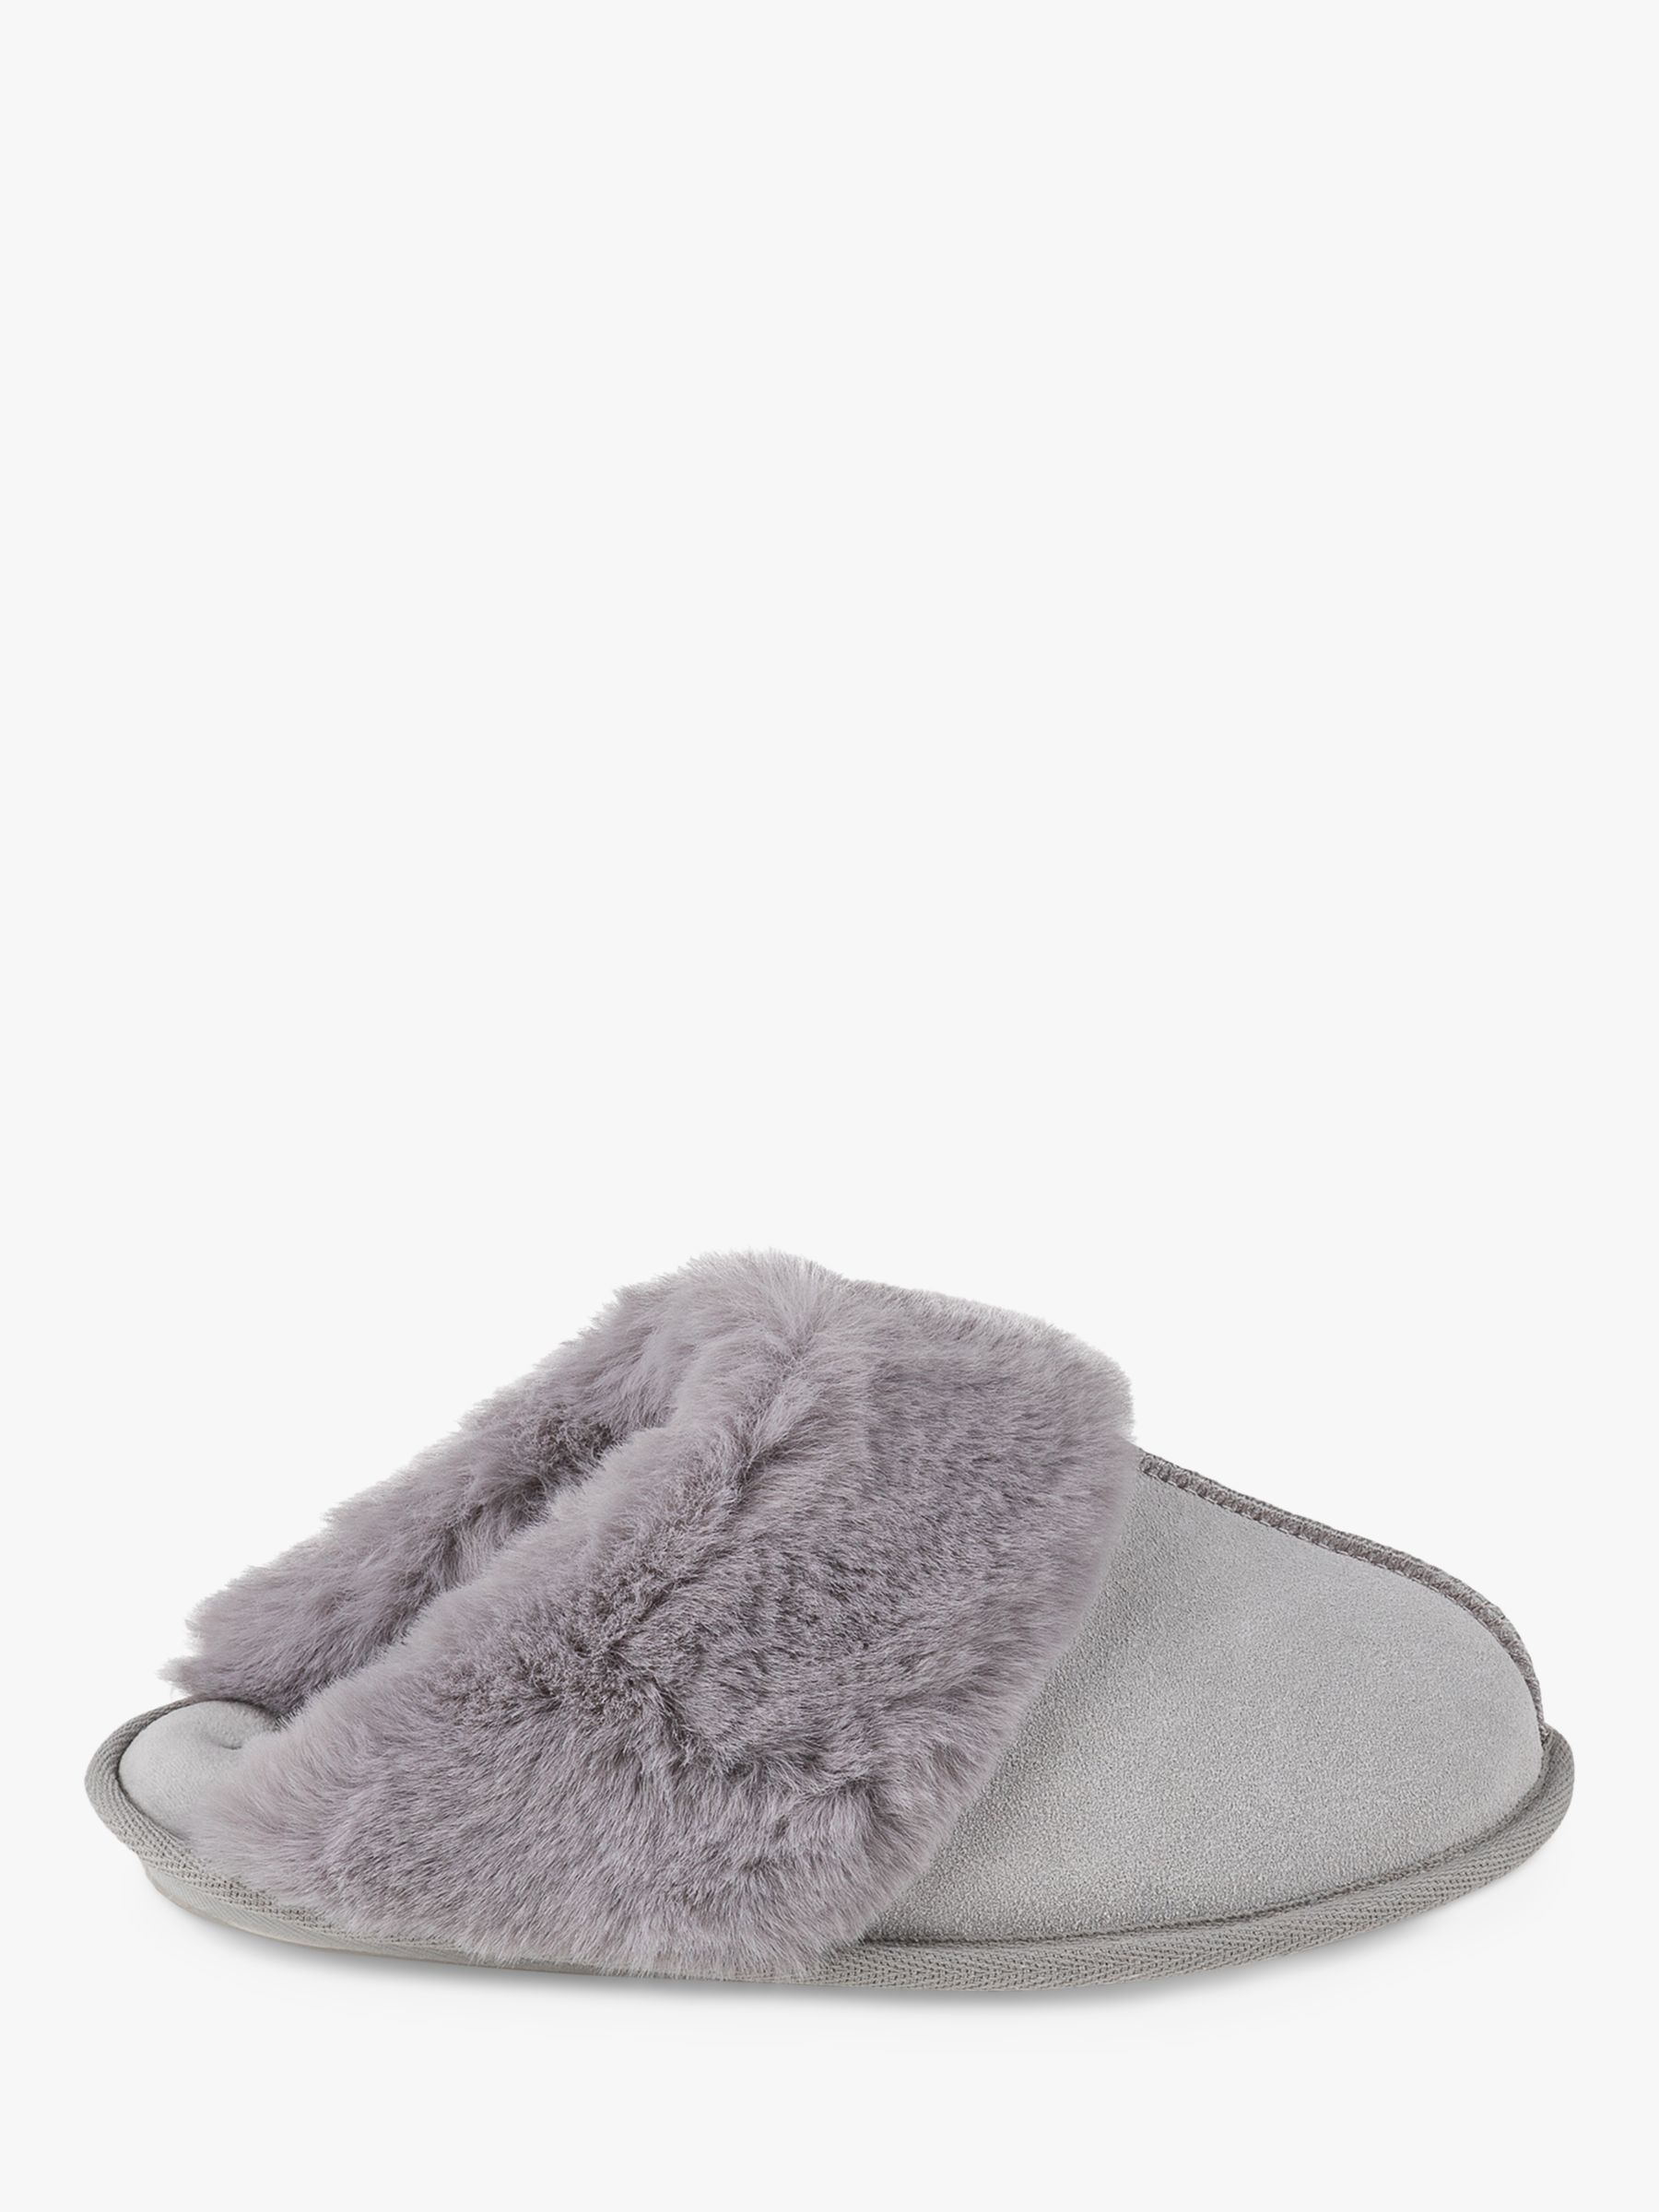 Fur Lined Slippers | John Lewis & Partners